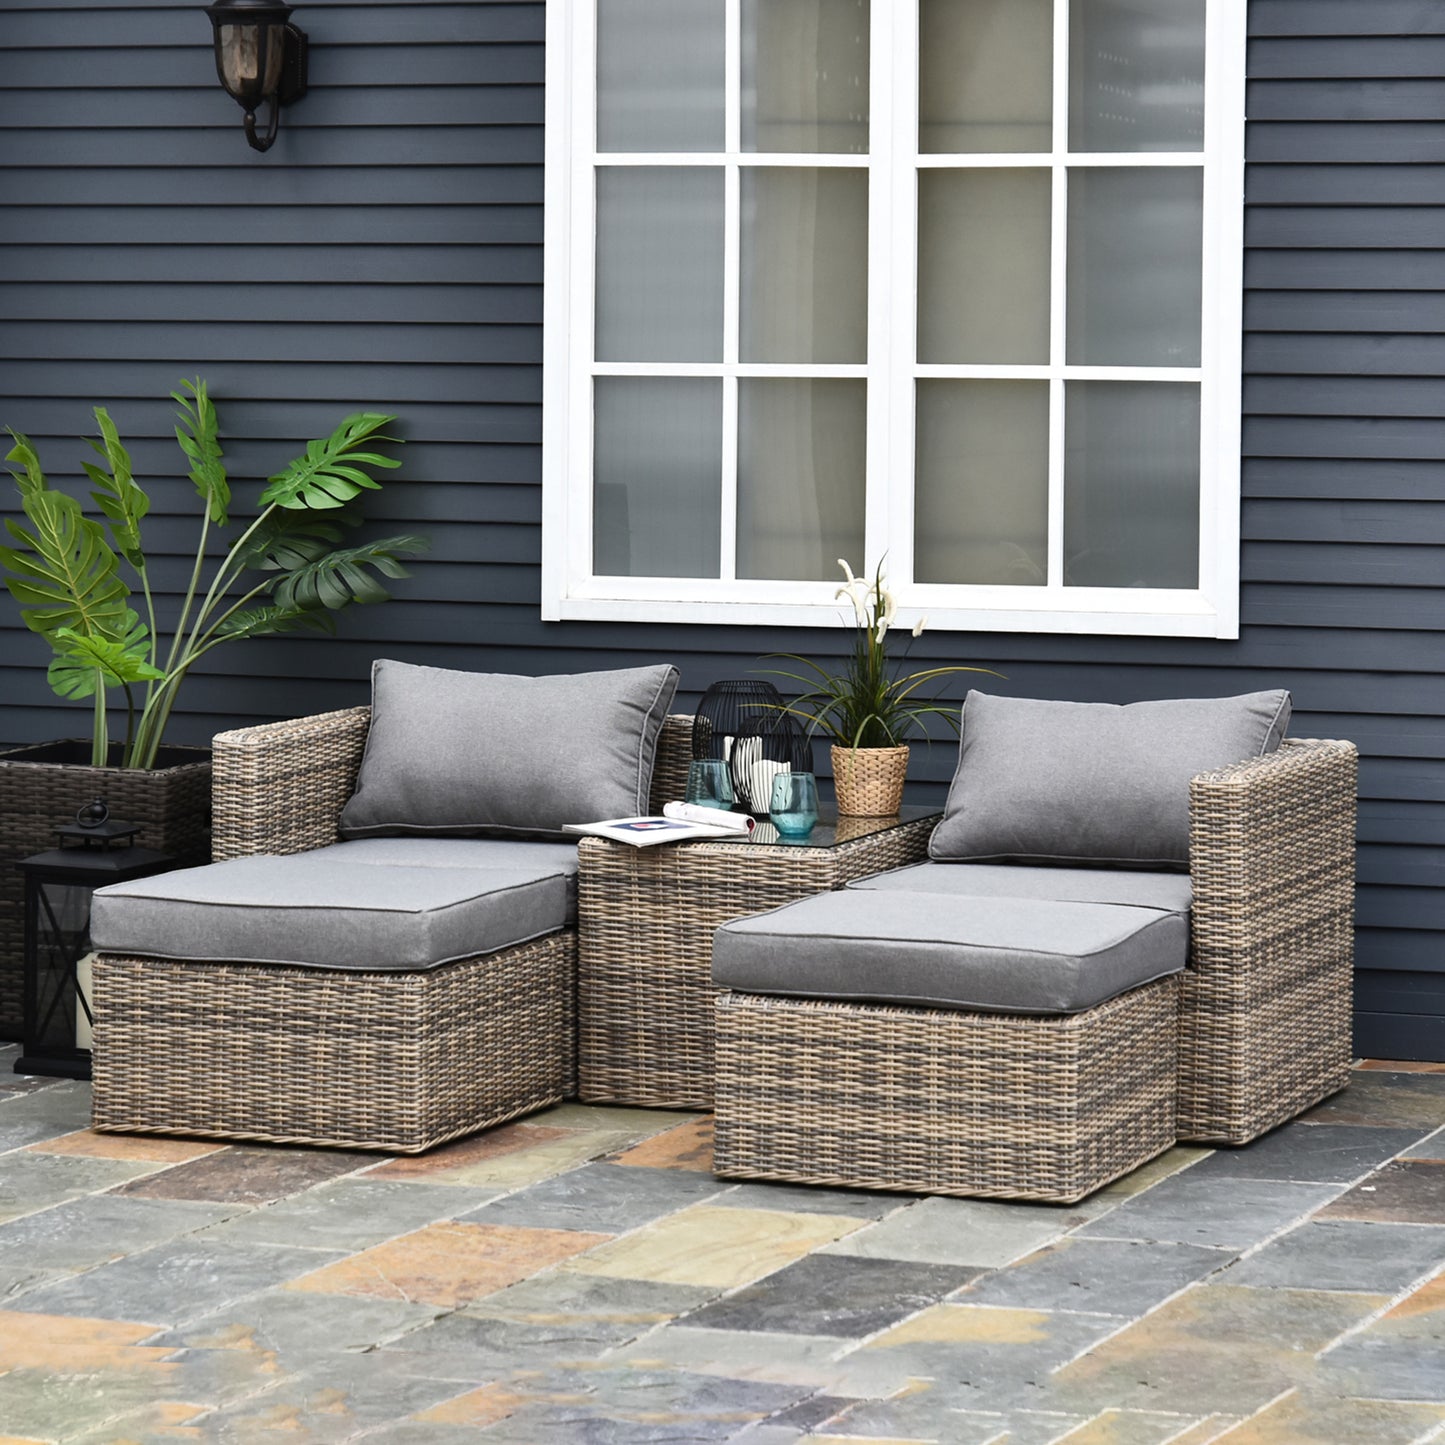 Outsunny 2 Seater Rattan Garden Furniture Set w/ Tall Glass-Top Table Aluminium Frame Plastic Wicker Thick Soft Cushions Outdoor Balcony Sofa, Grey